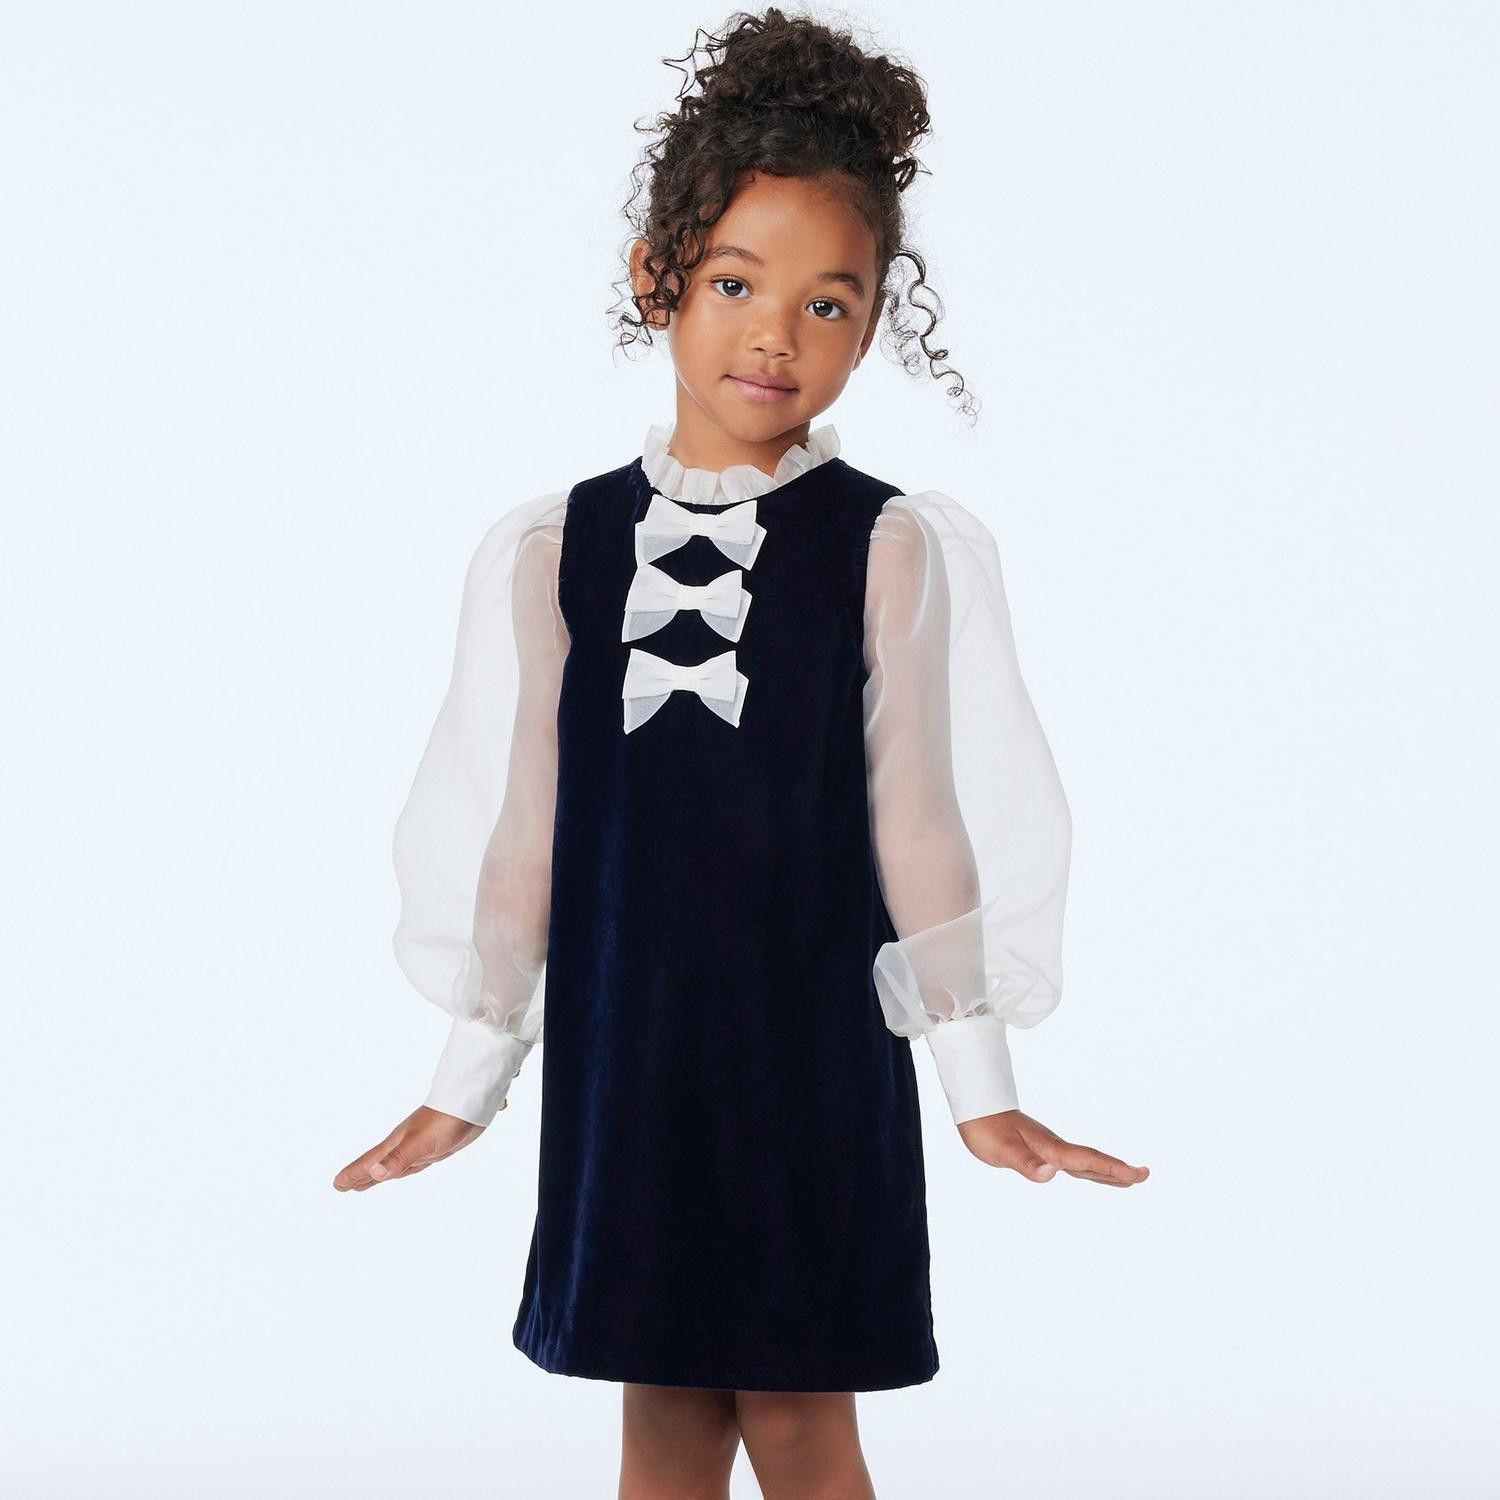 Velvet Organza Bow Dress | Holiday Dress For Girls | Mommy And Me Photo shoot #LTKkids #LTKfamily  | Janie and Jack